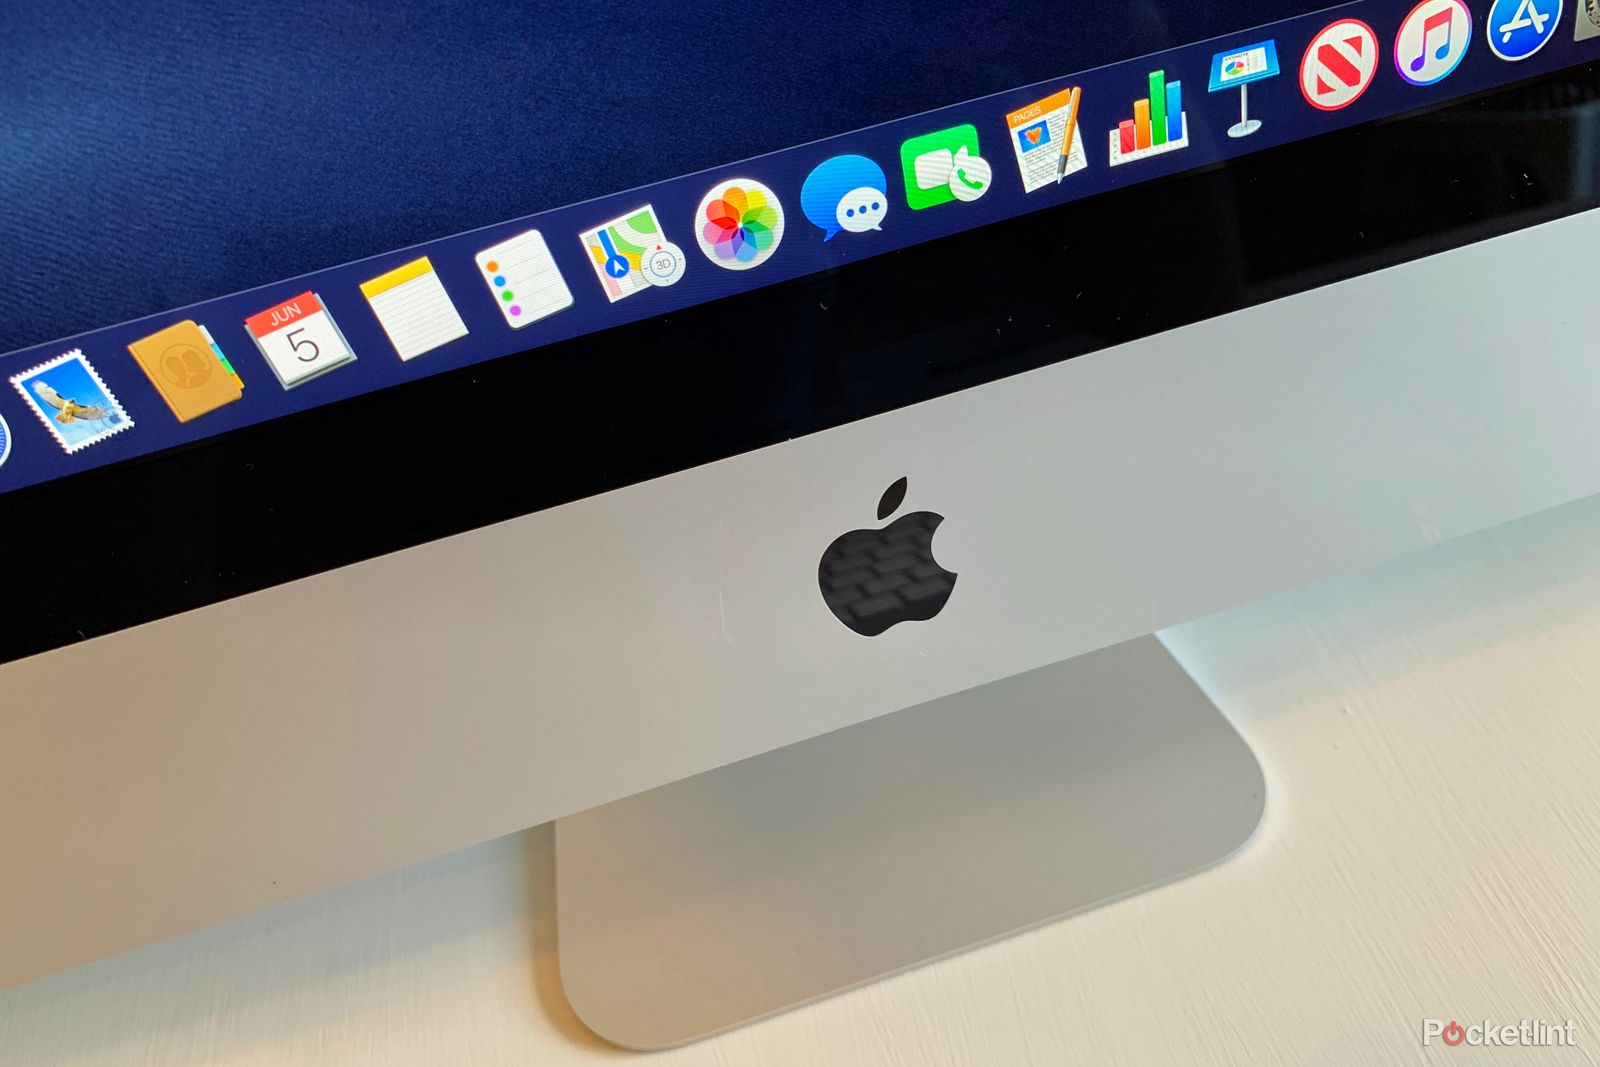 Apple iMac 215-inch review 2019 image 2